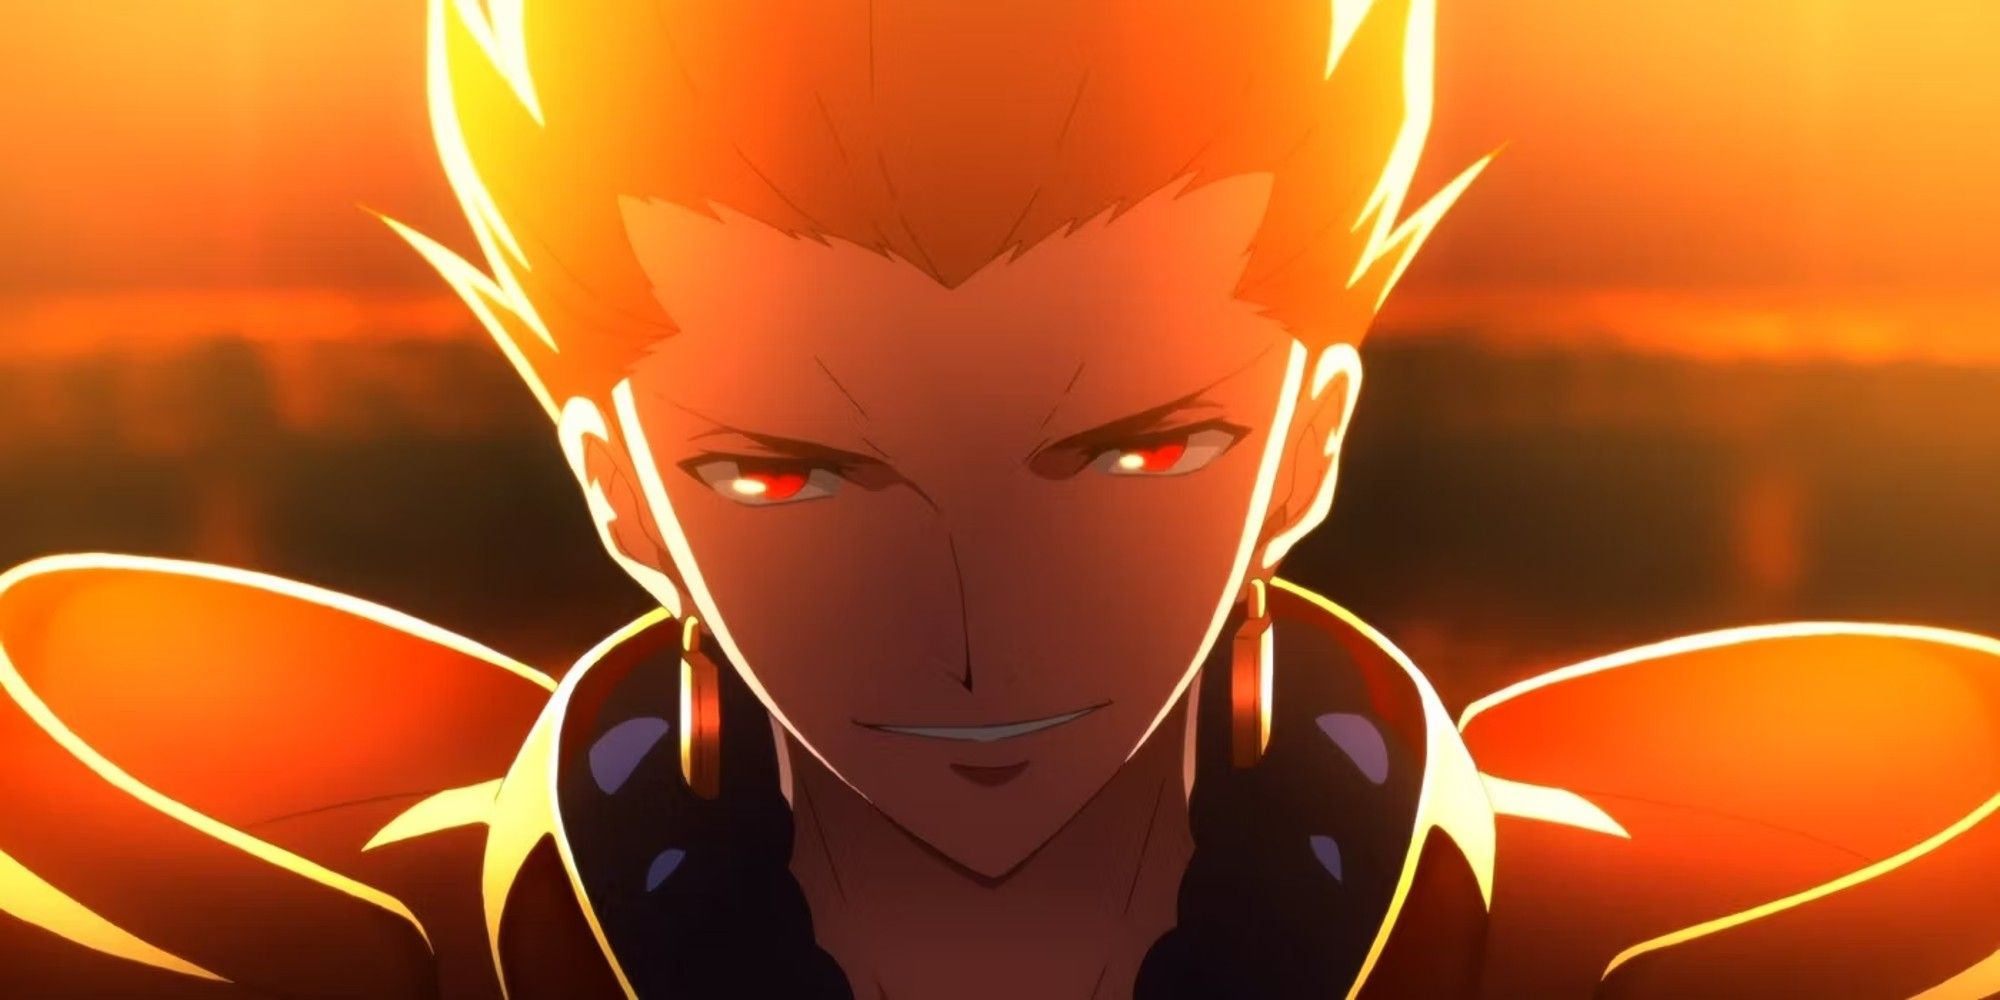 Gilgamesh smiles as the only proud king - Fate-Zero